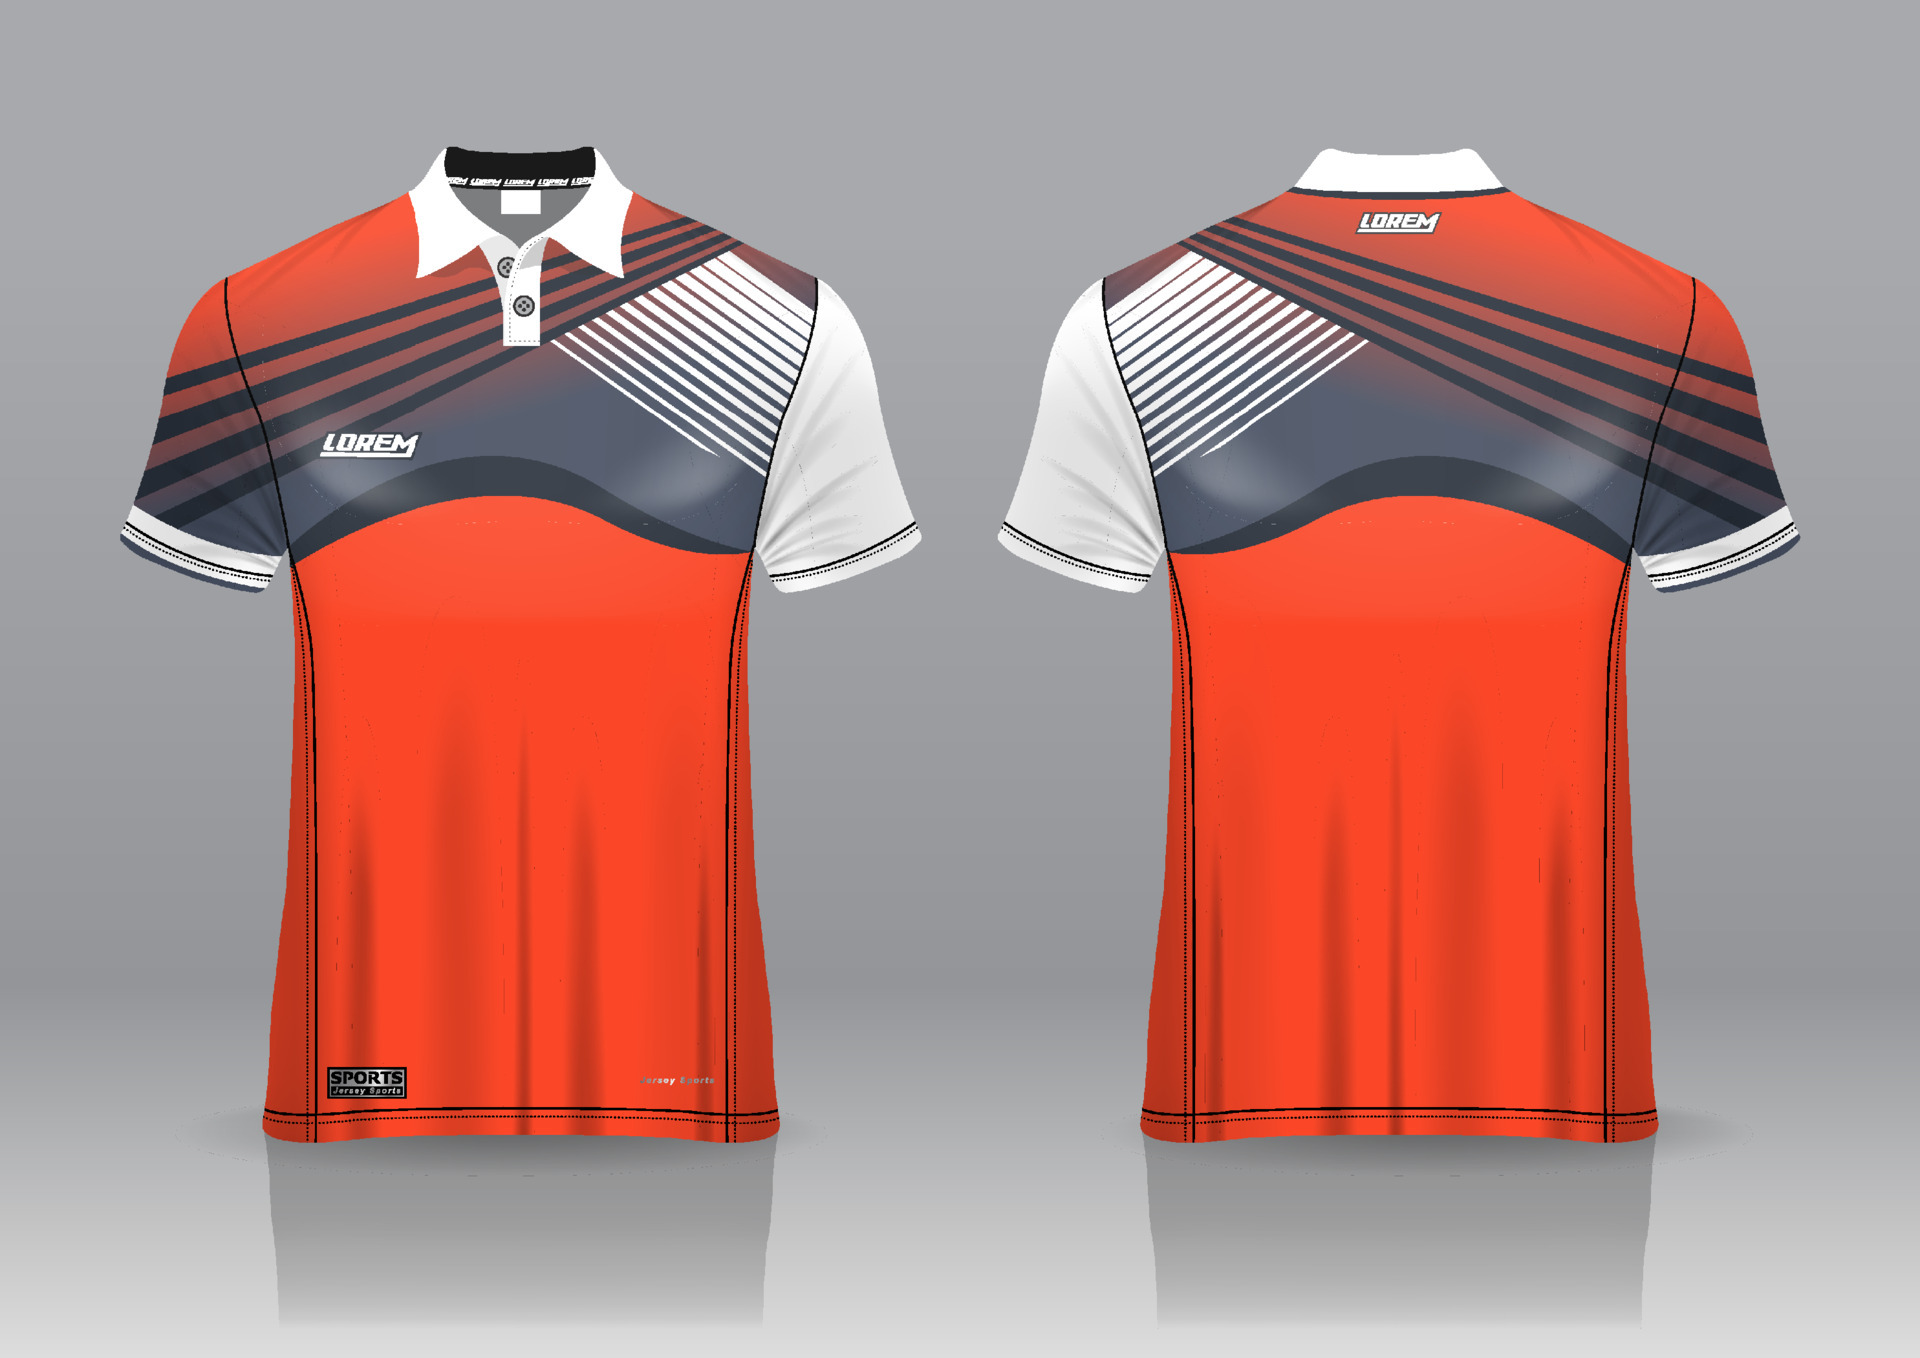 polo shirt uniform design, can be used for badminton, golf in front ...